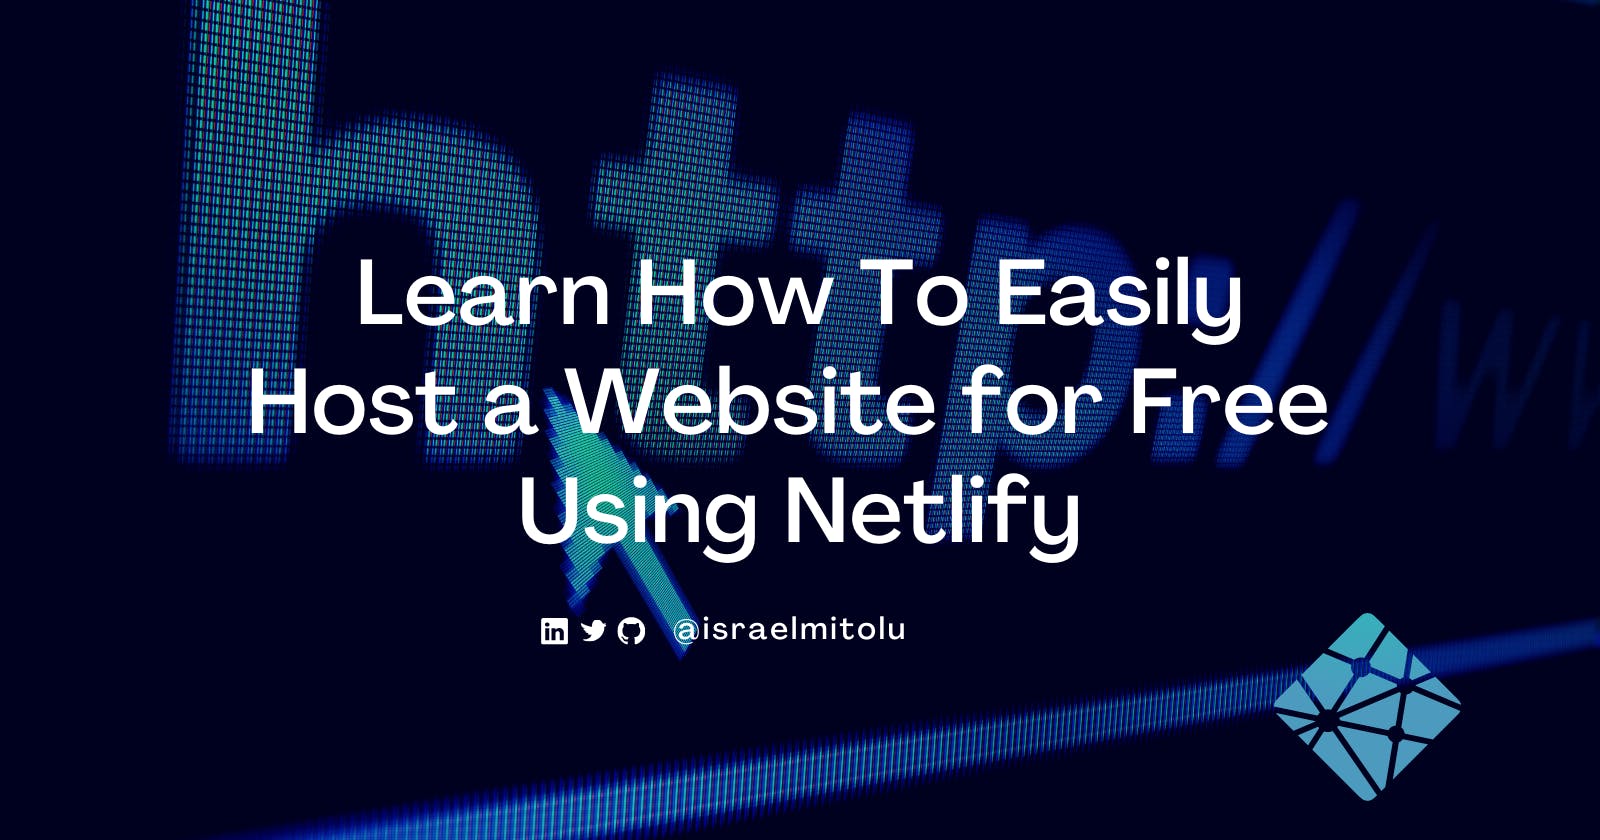 How to Easily Host a Website for Free Using Netlify